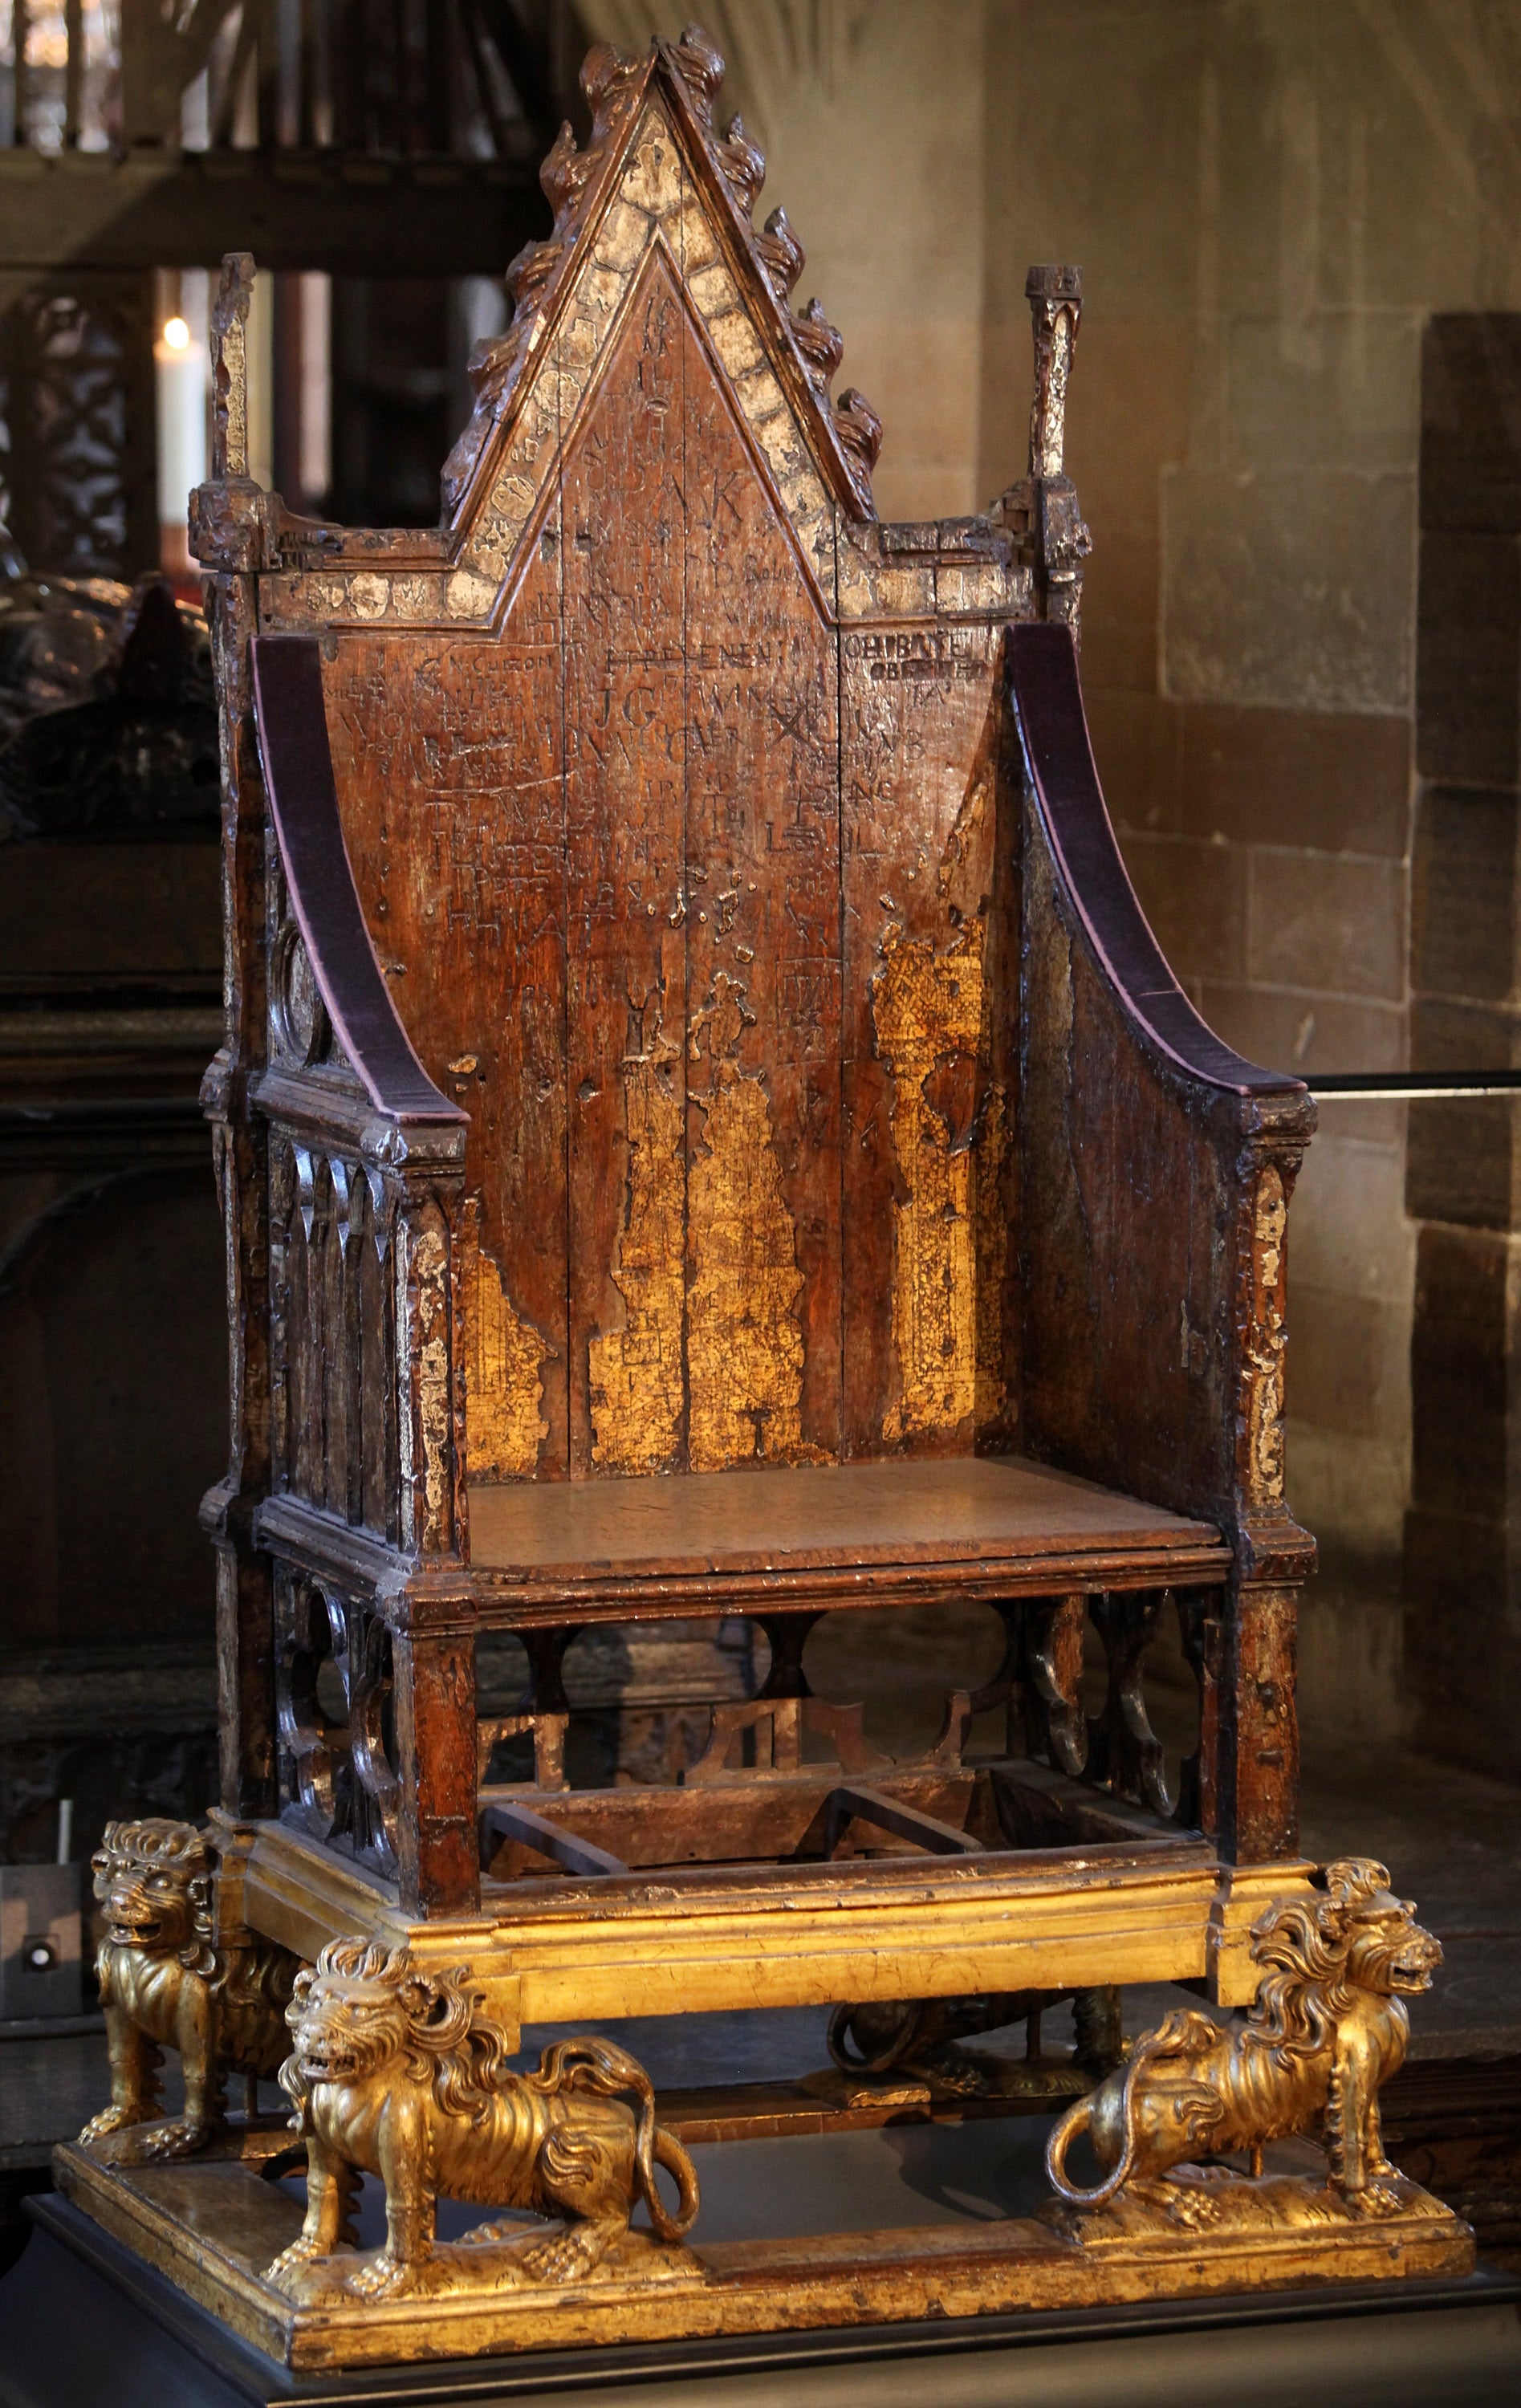 A general view of the Coronation Chair in Westminster Abbey on which King Henry VIII was throned in 1509